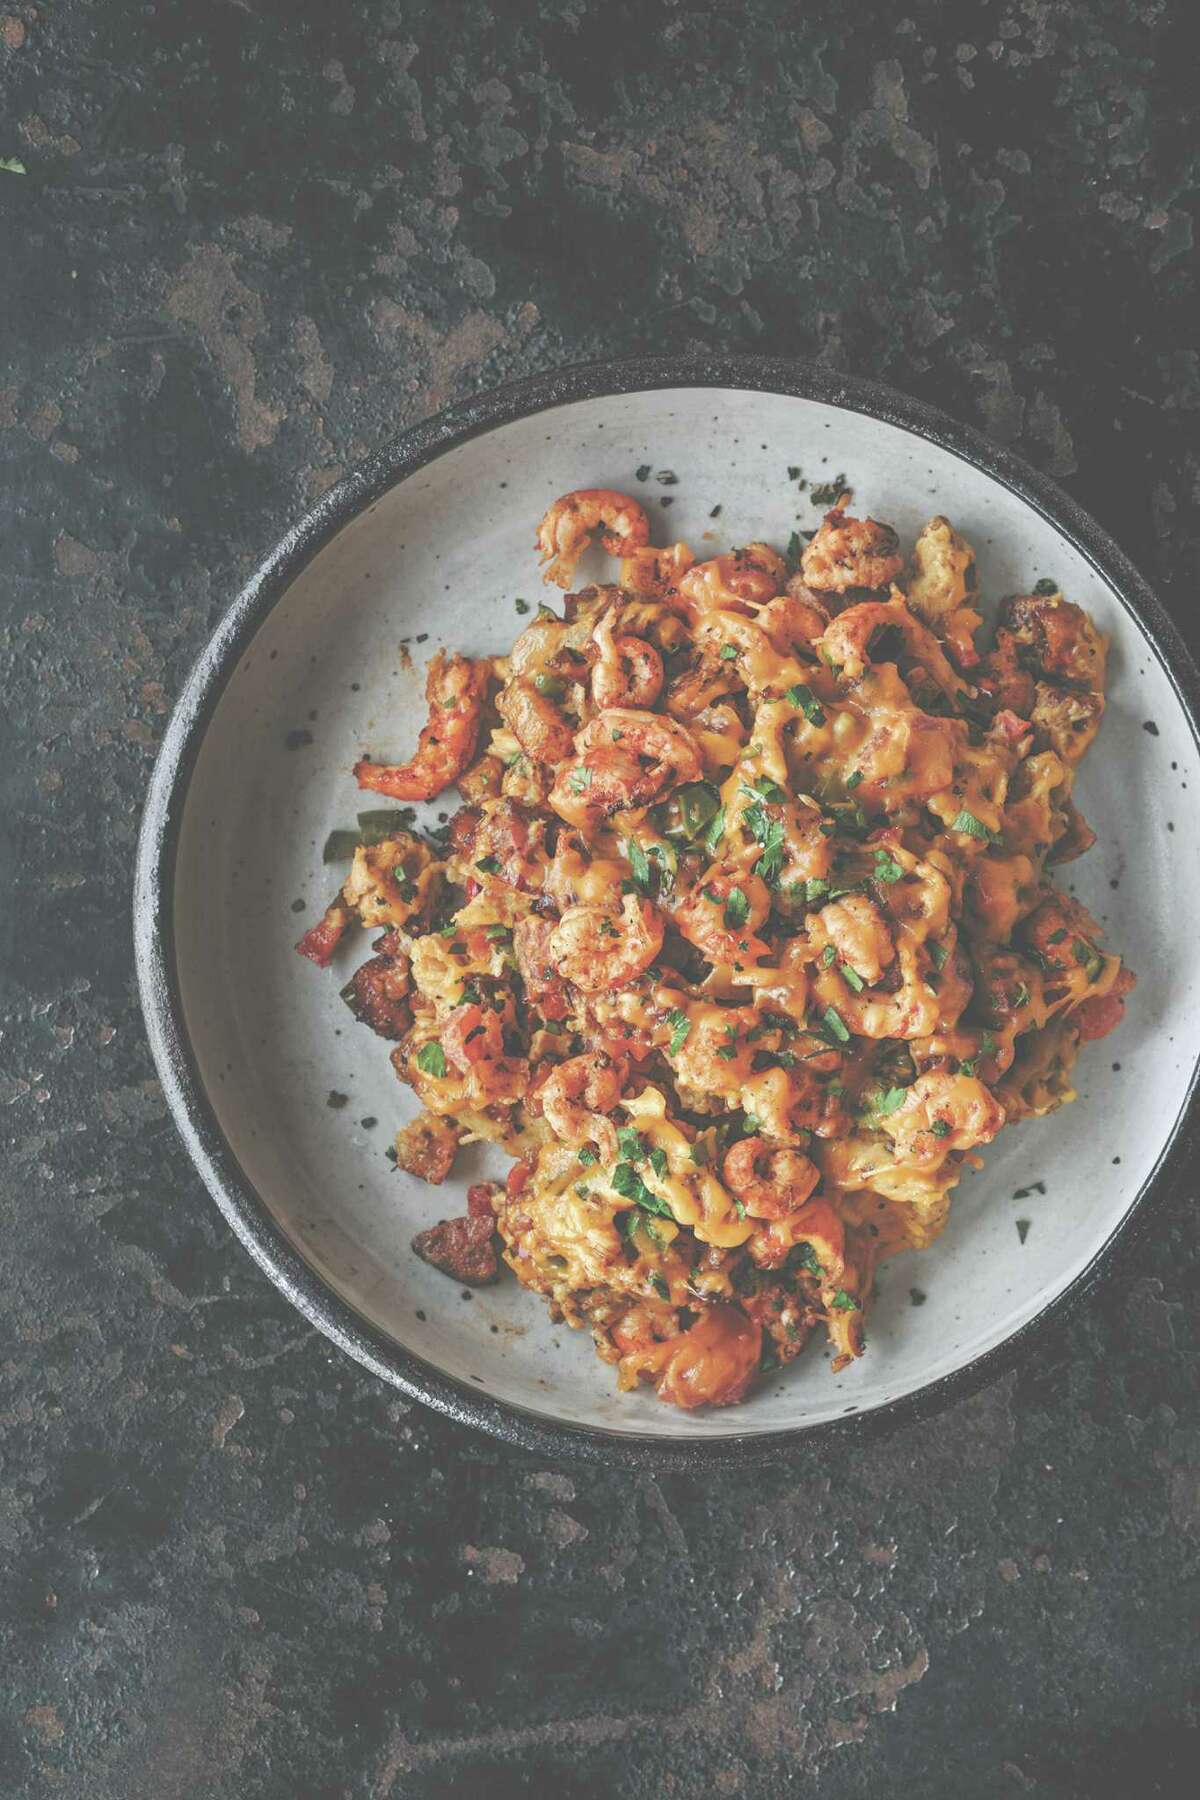 "Big Bad Breakfast: The Most Important Book of the Day" by John Currence showcases dishes such as this Creole Skillet Scramble.